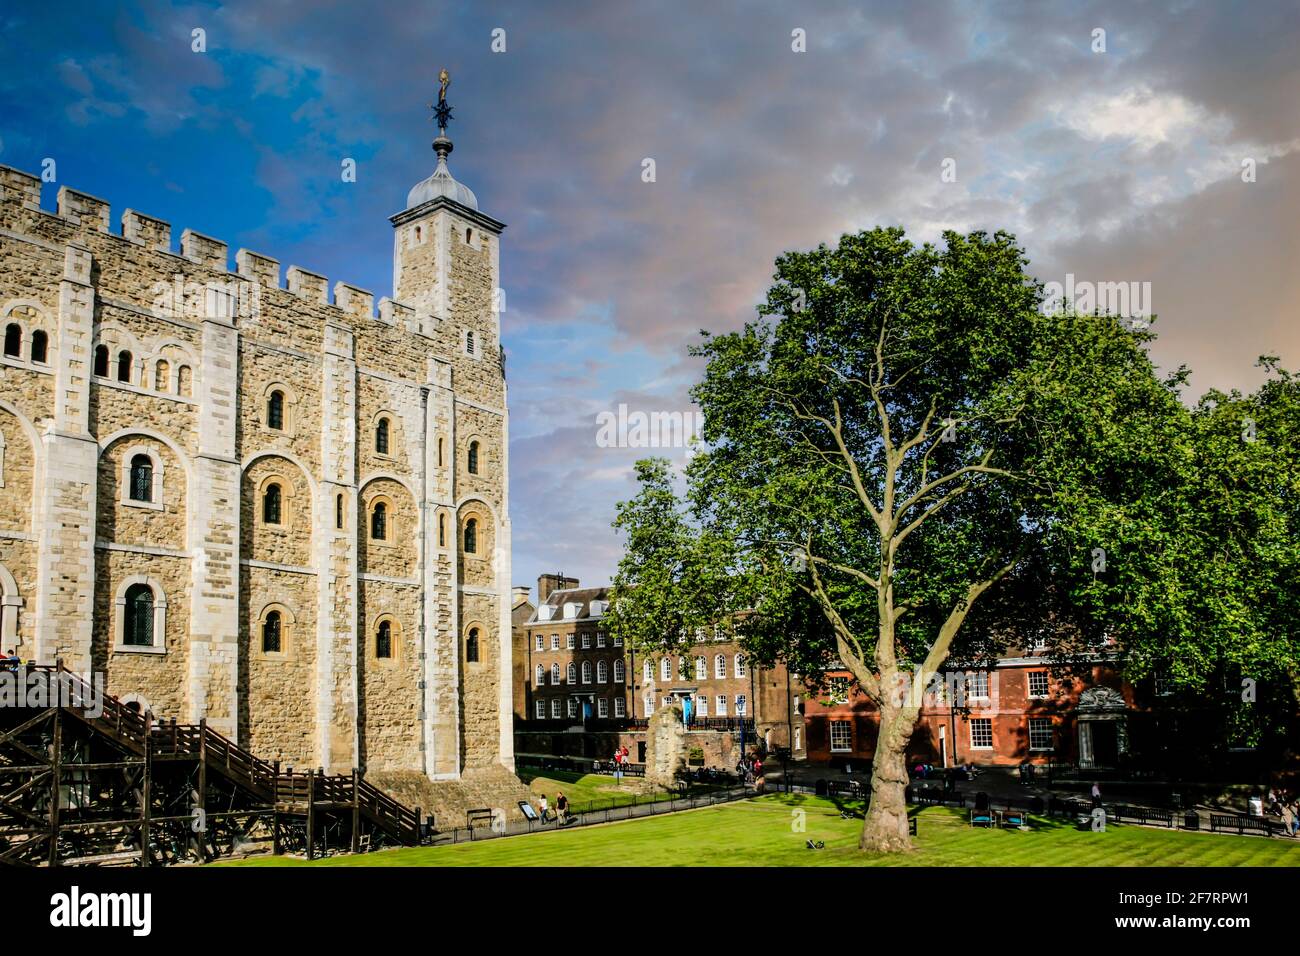 The White Tower in the Tower of London complex Stock Photo